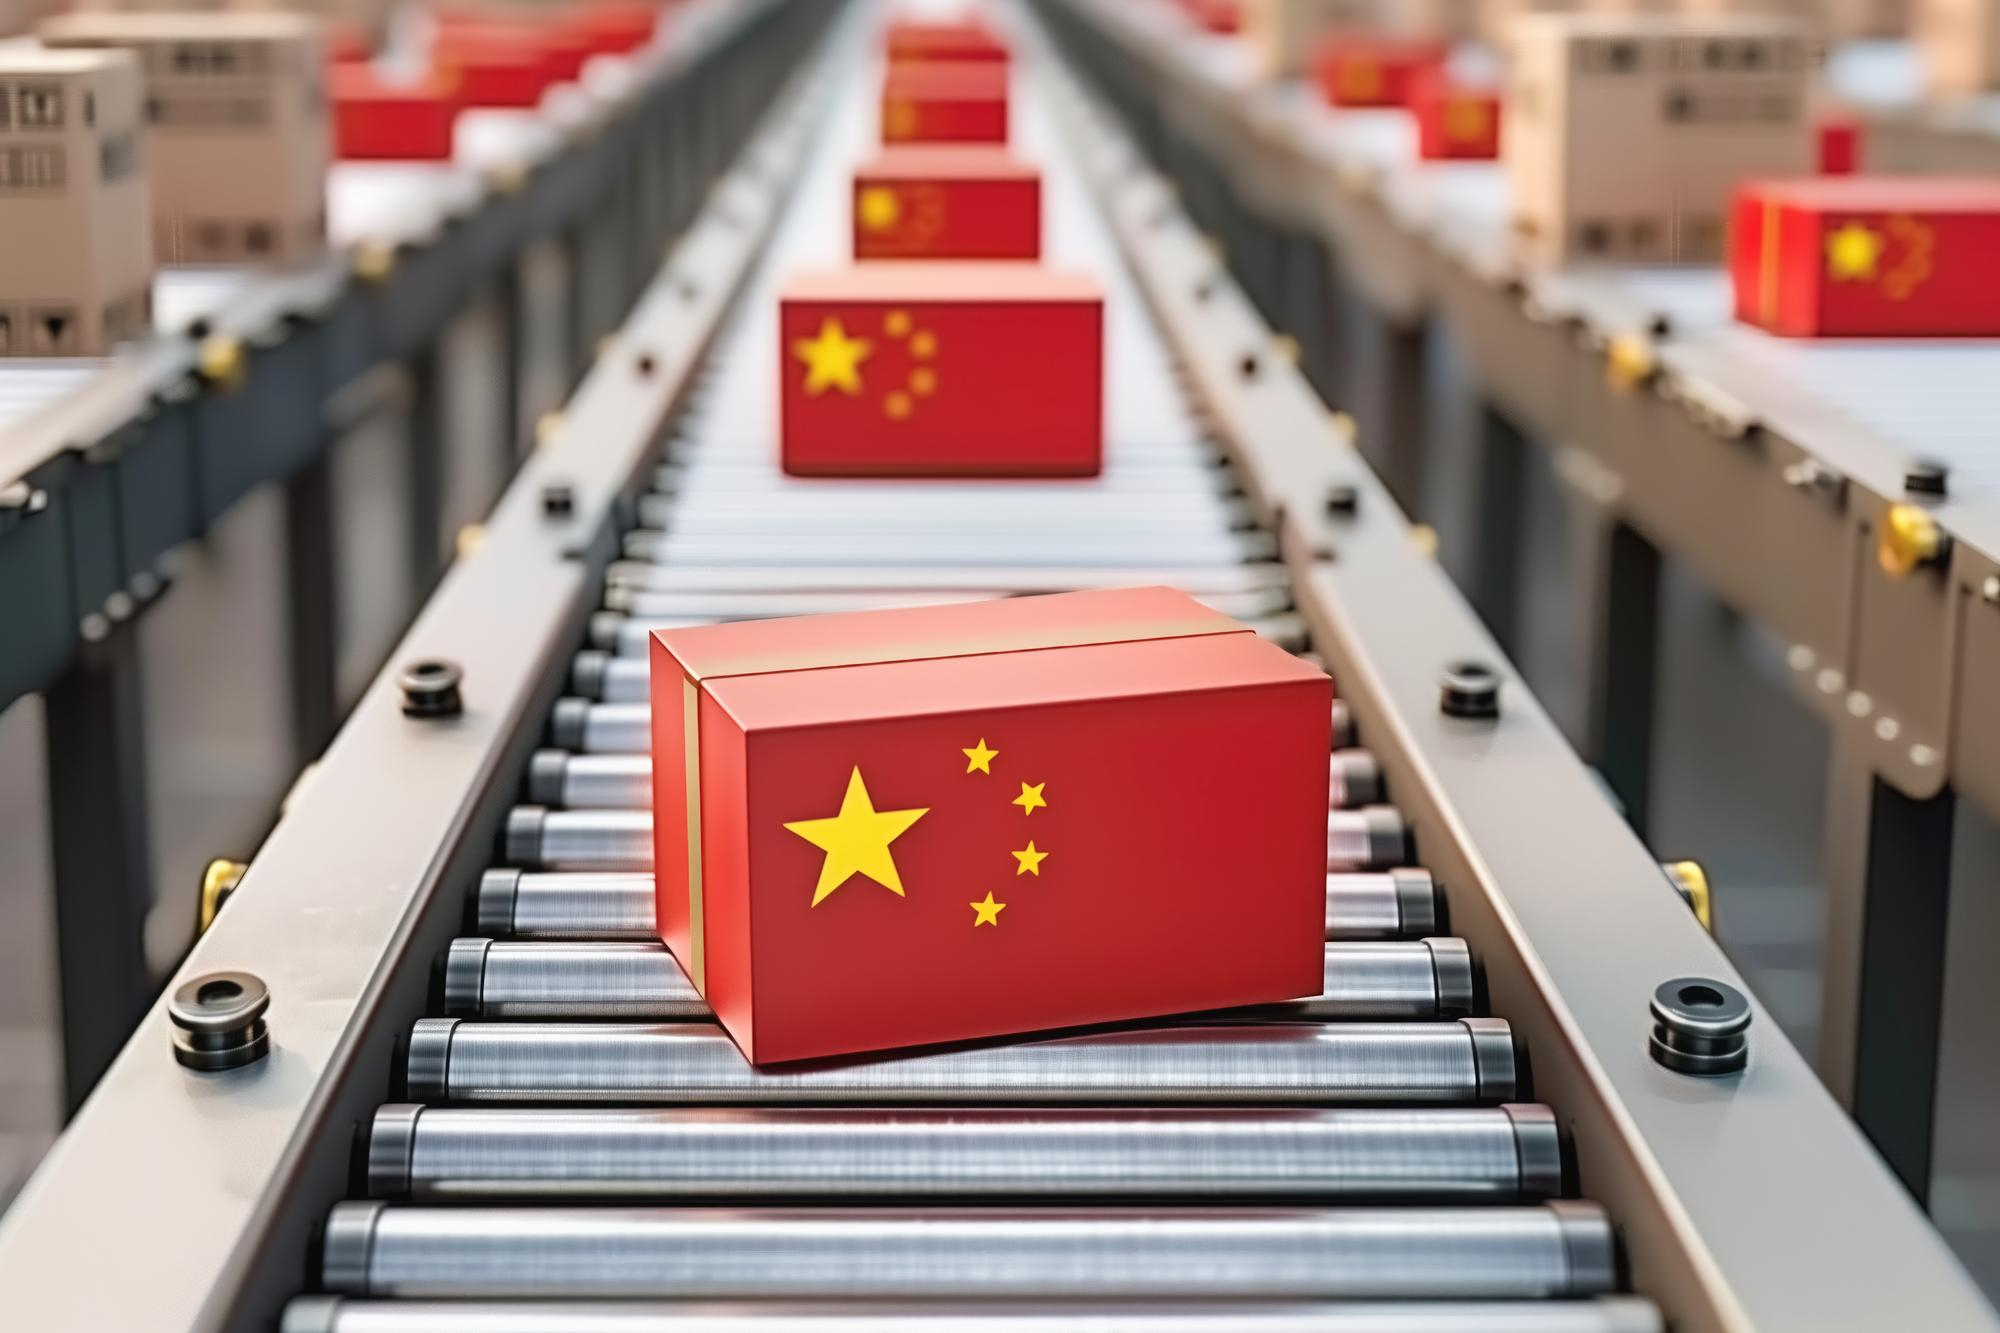 How to import goods from China? Essential tips for beginner entrepreneurs